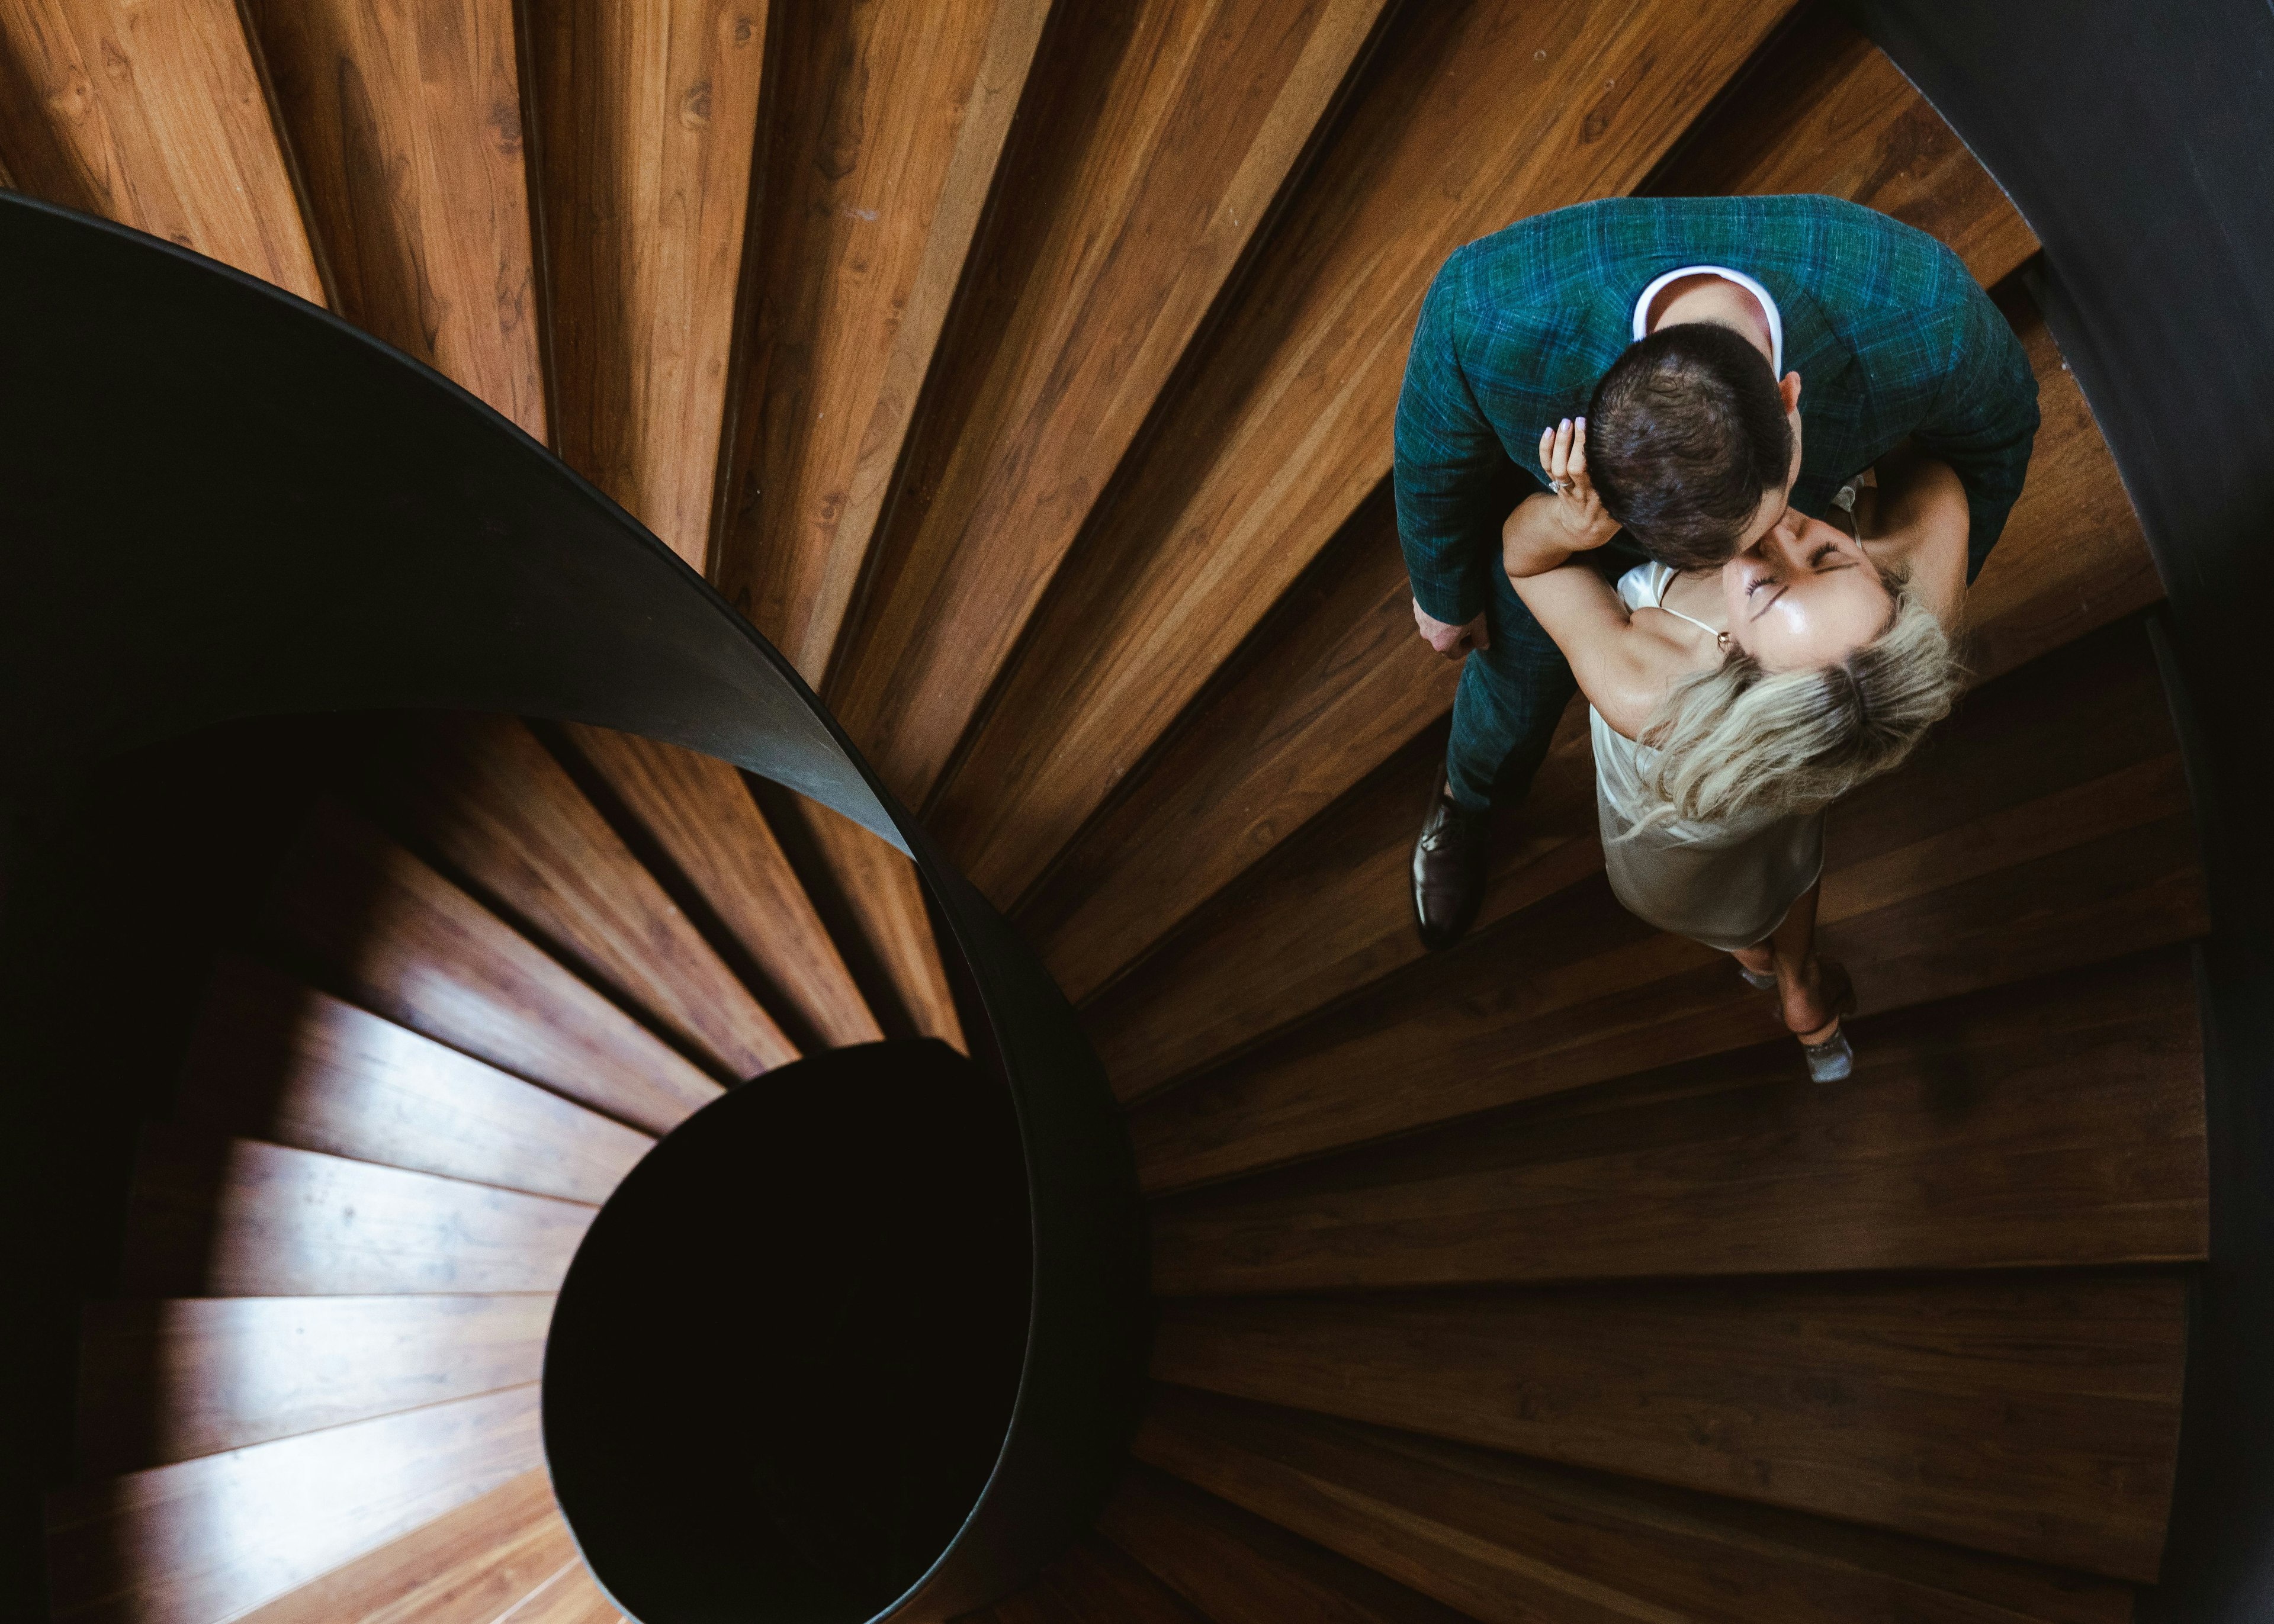 An aerial view of an intimate moment, capturing a couple sharing a kiss on a spiraling wooden staircase at Vivid Grand Island, the architecture framing their embrace in a stunning geometric composition.